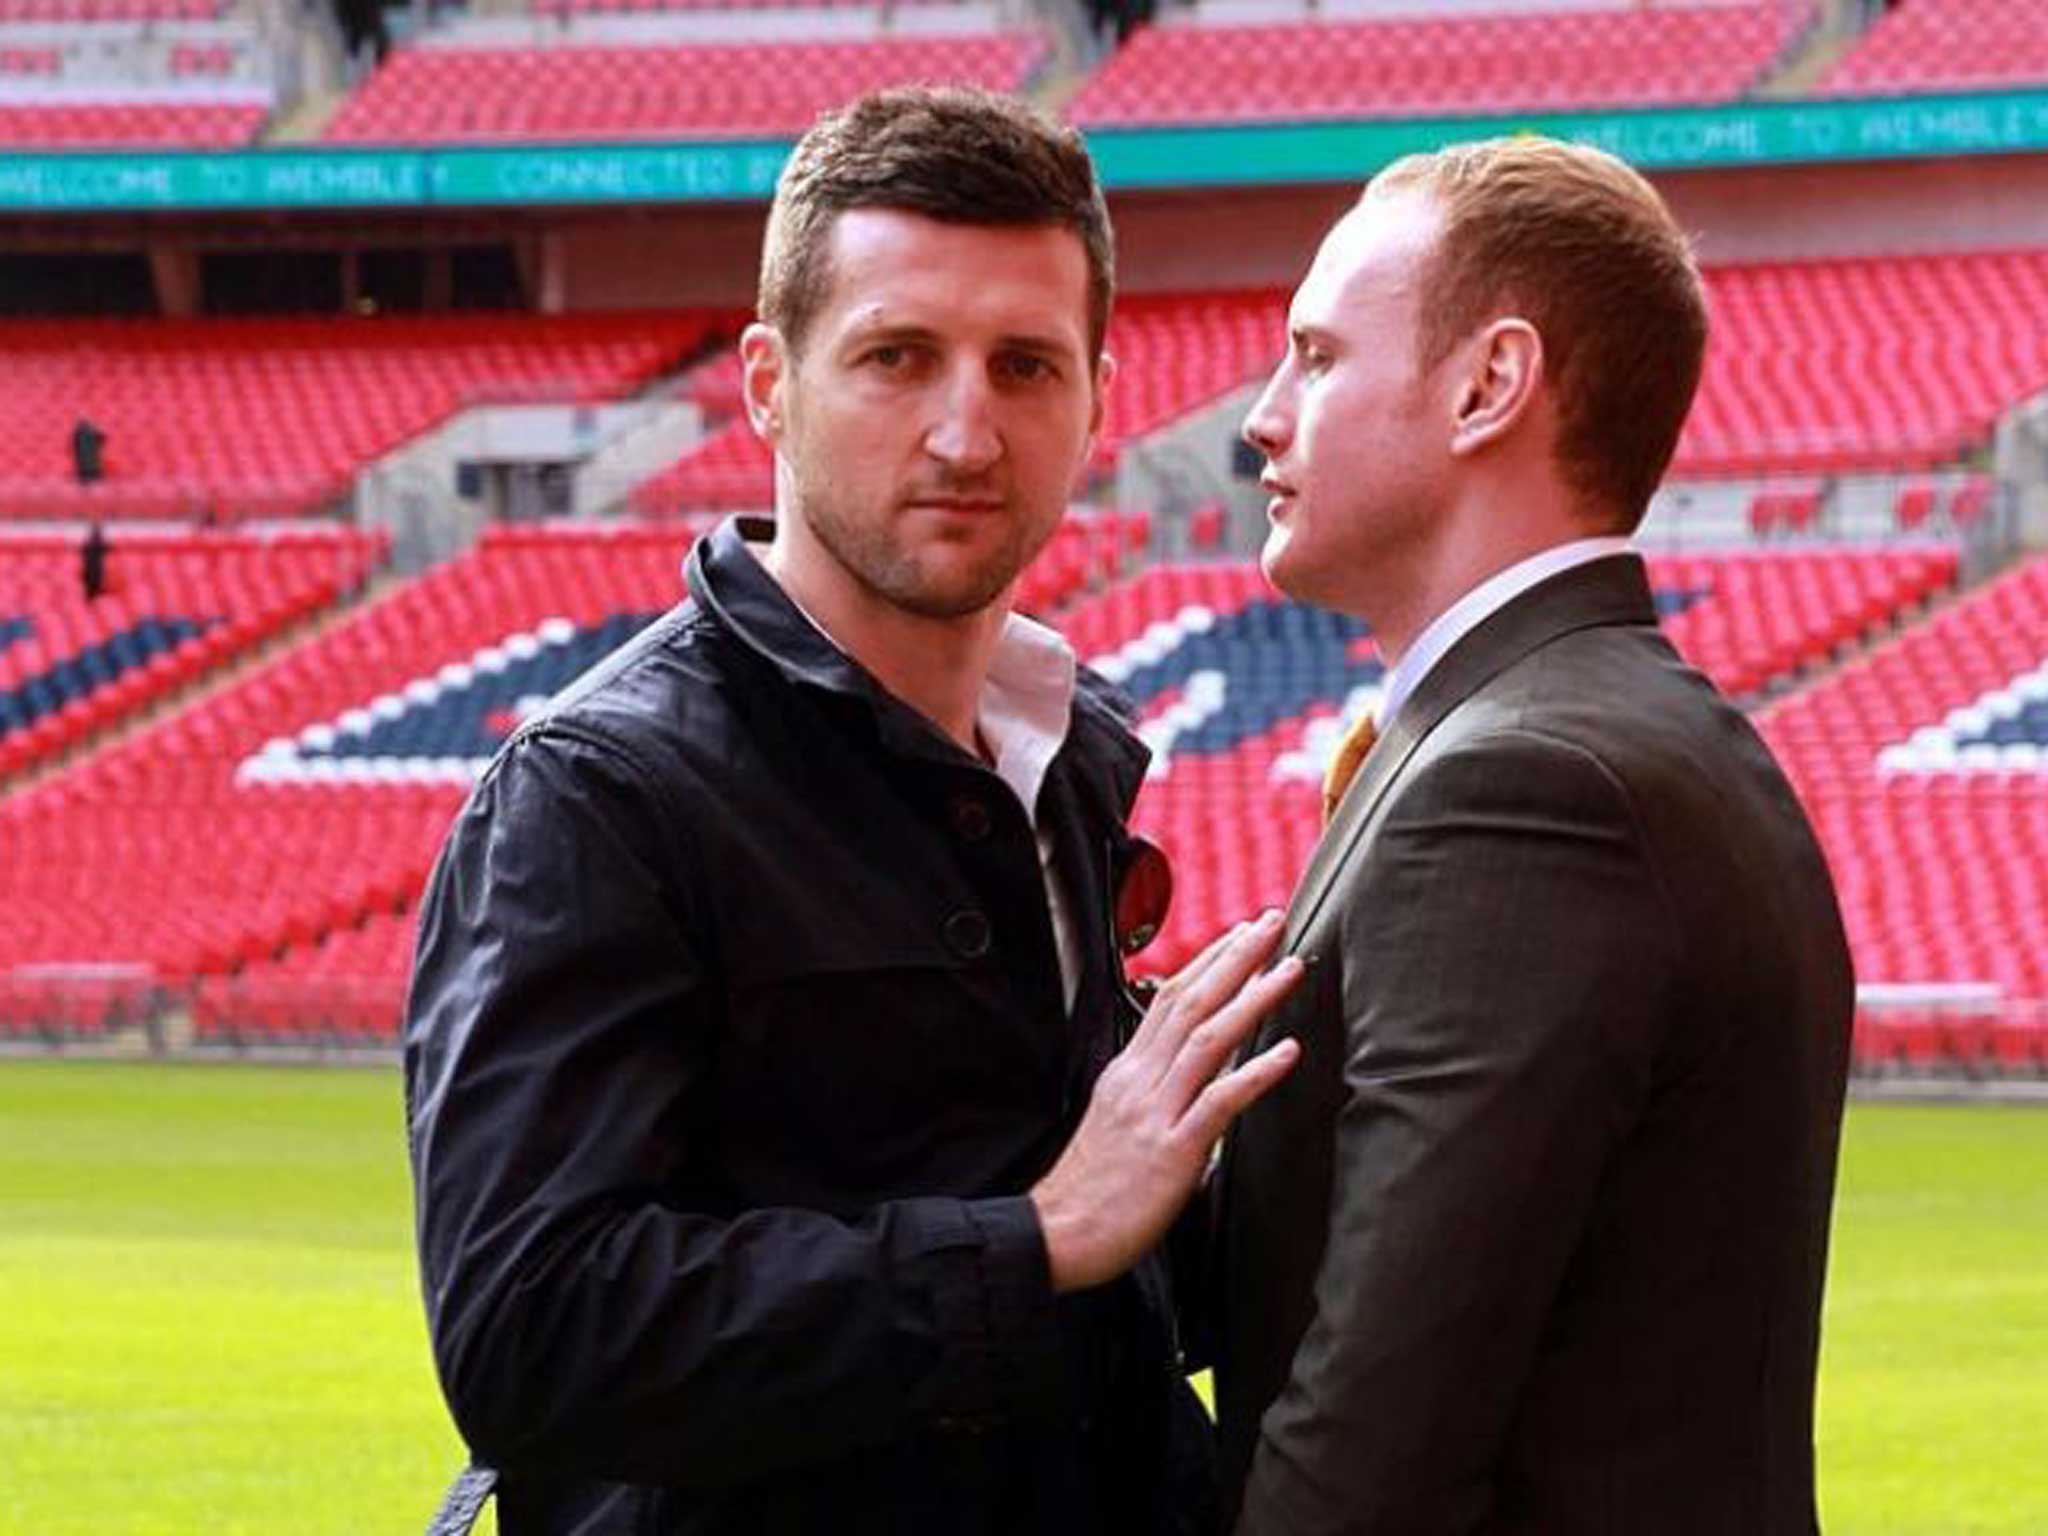 Underdog Groves (right) had “wound up” Froch (left) by impudently pricking his renowned ego at every turn